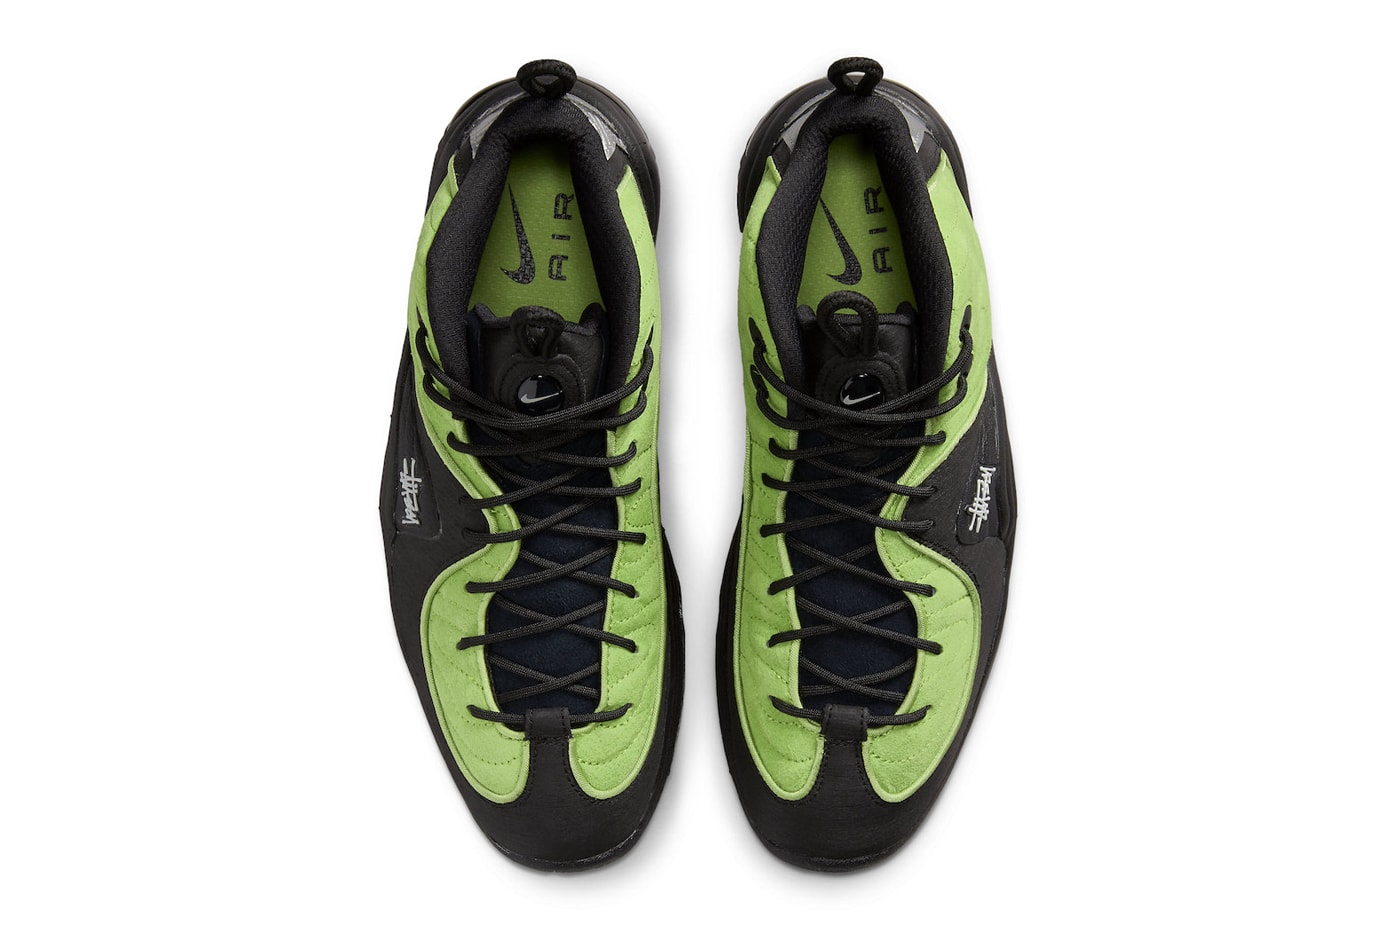 Stüssy Nike Air Max Penny 2 Black Vivid Green Release Date Info DQ5674-001 DX6933-300 Buy Price 